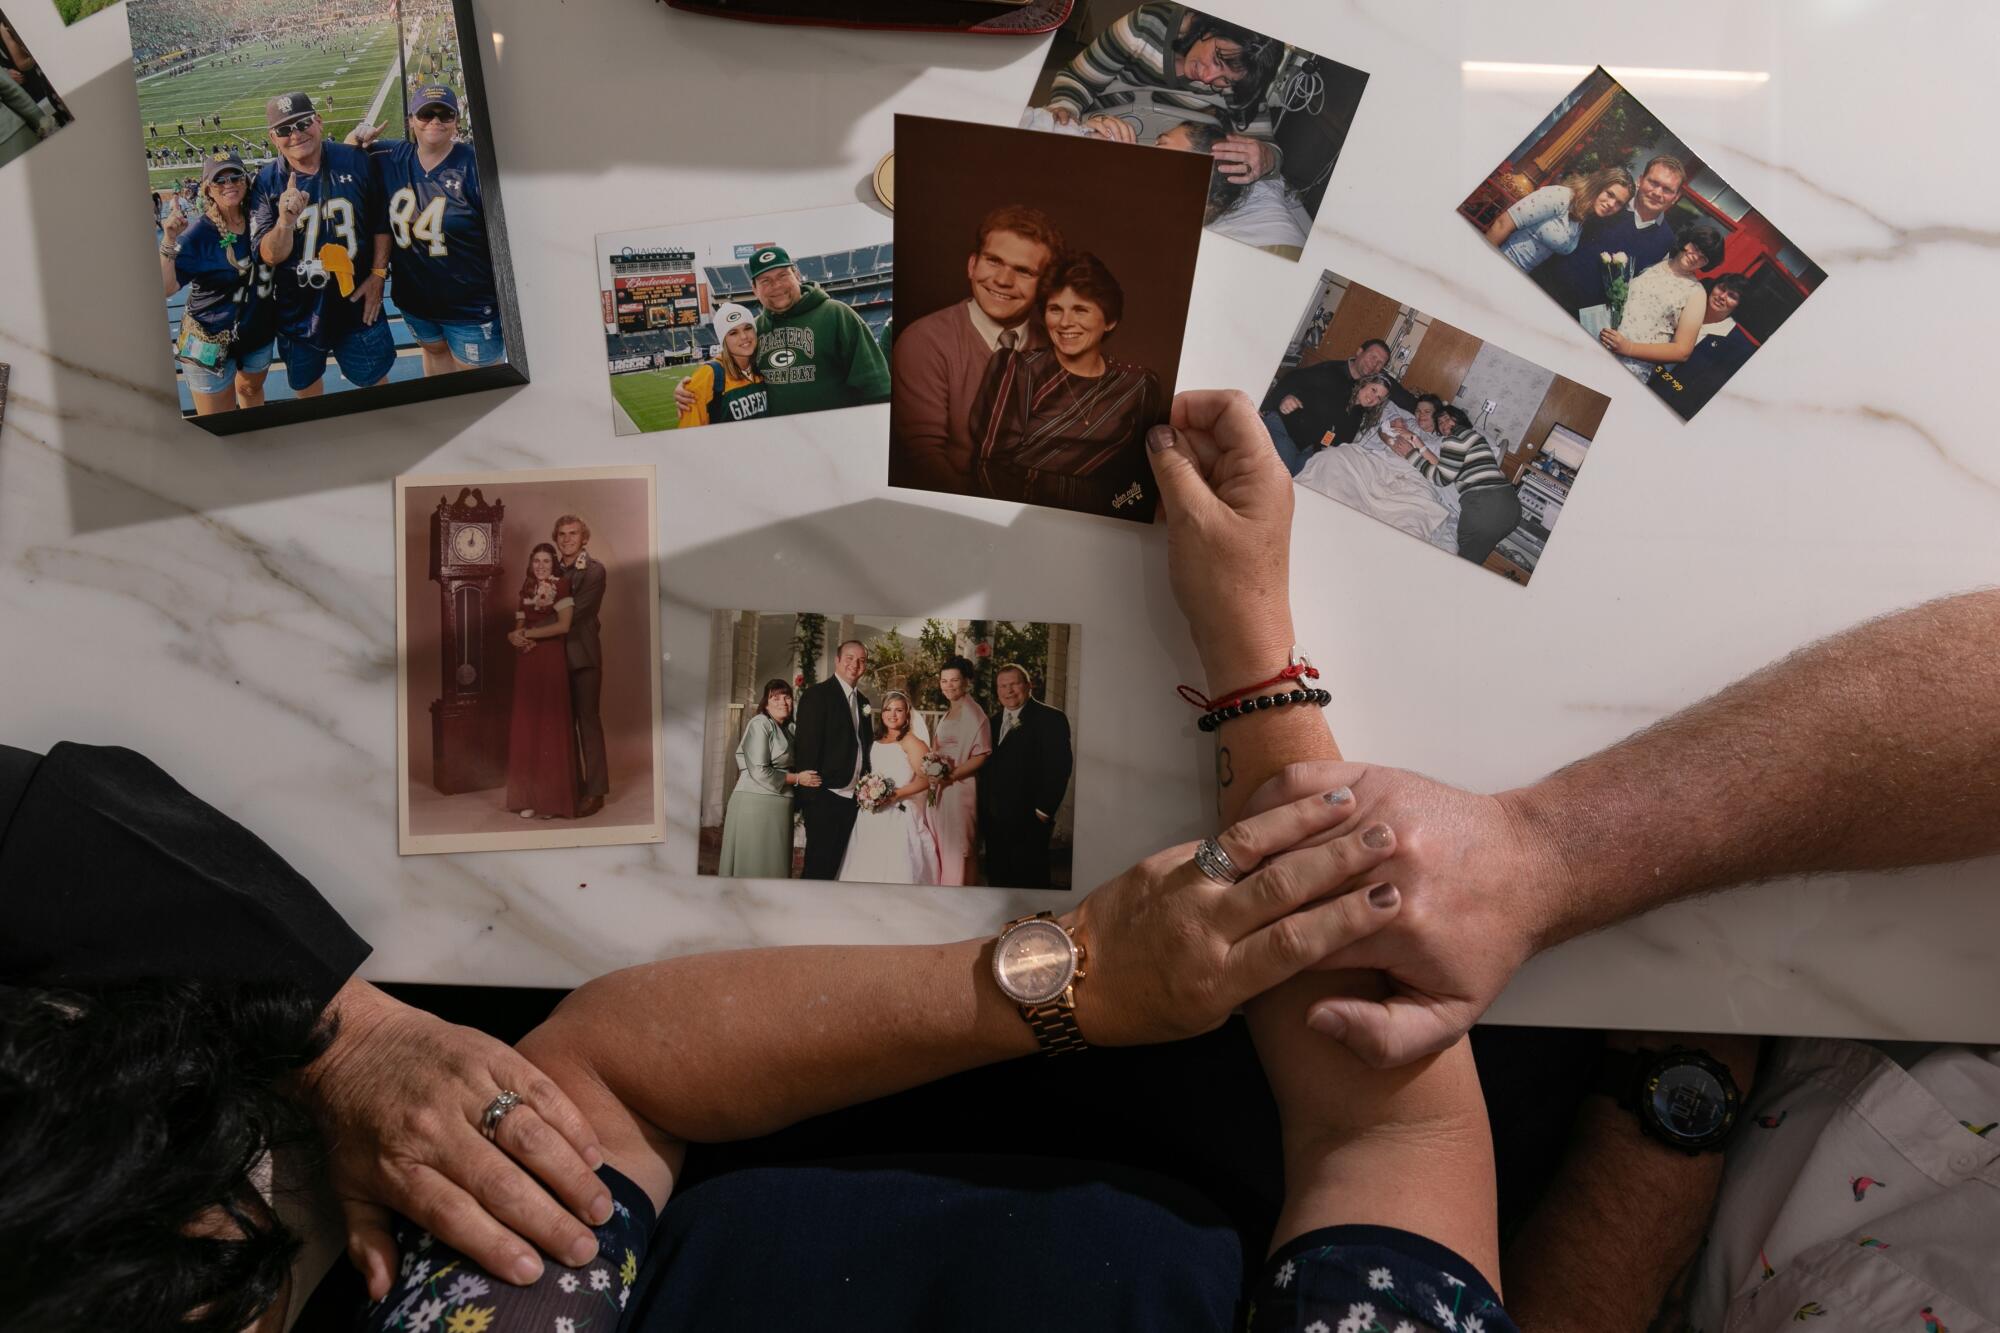 Mychelle Blandin looks at photos of her mom, dad and sister